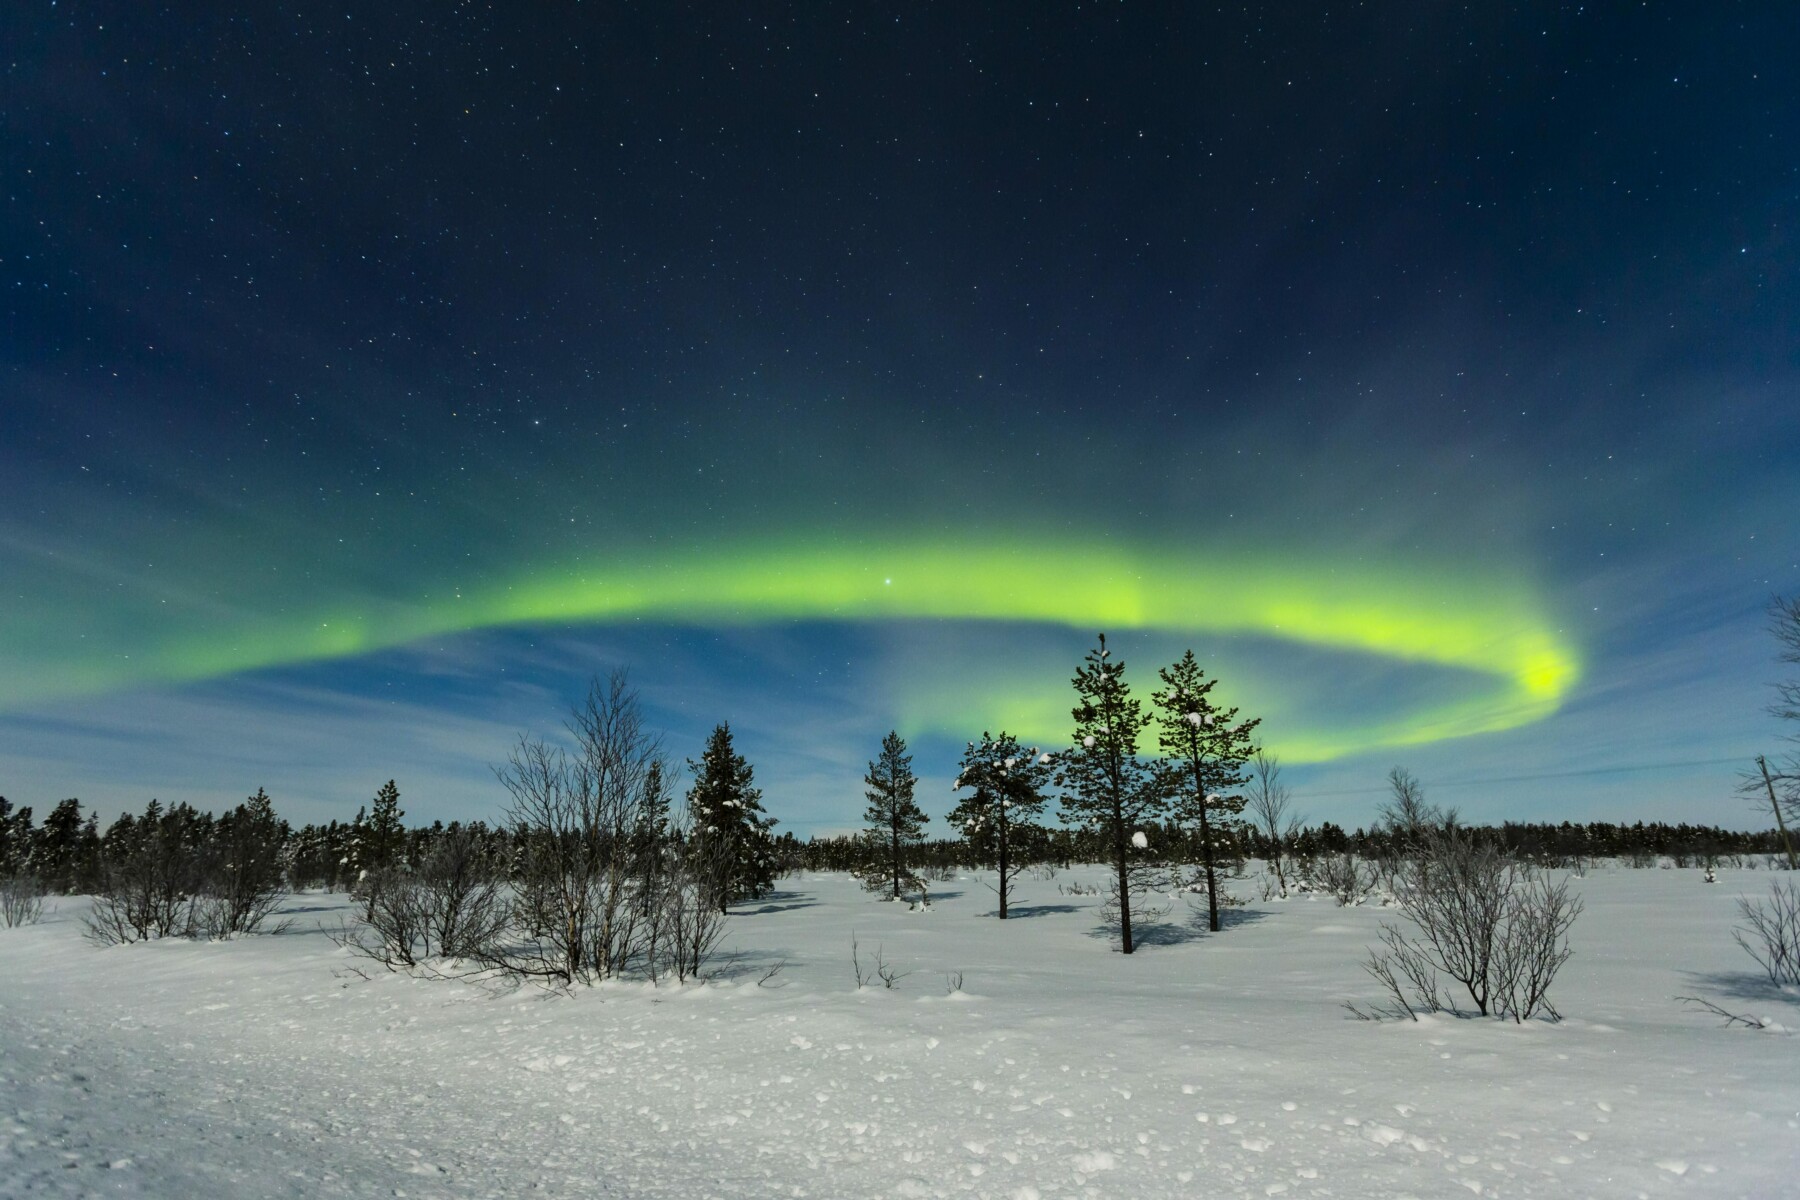 A green ring of light is visible in the dark sky over a snow-covered landscape.